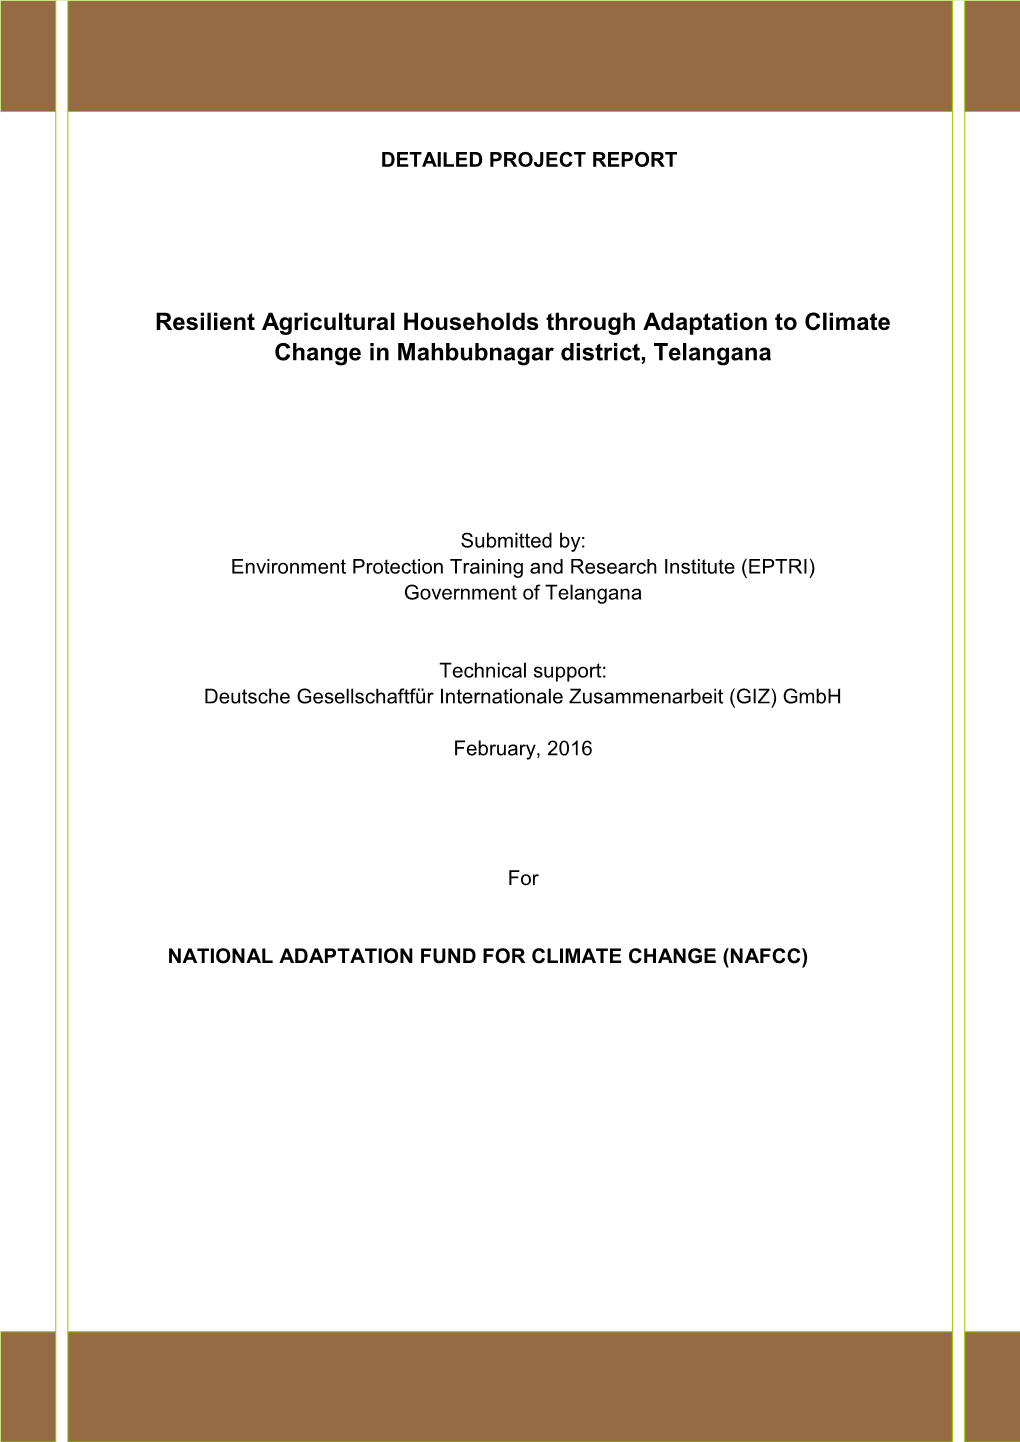 Resilient Agricultural Households Through Adaptation to Climate Change in Mahbubnagar District, Telangana